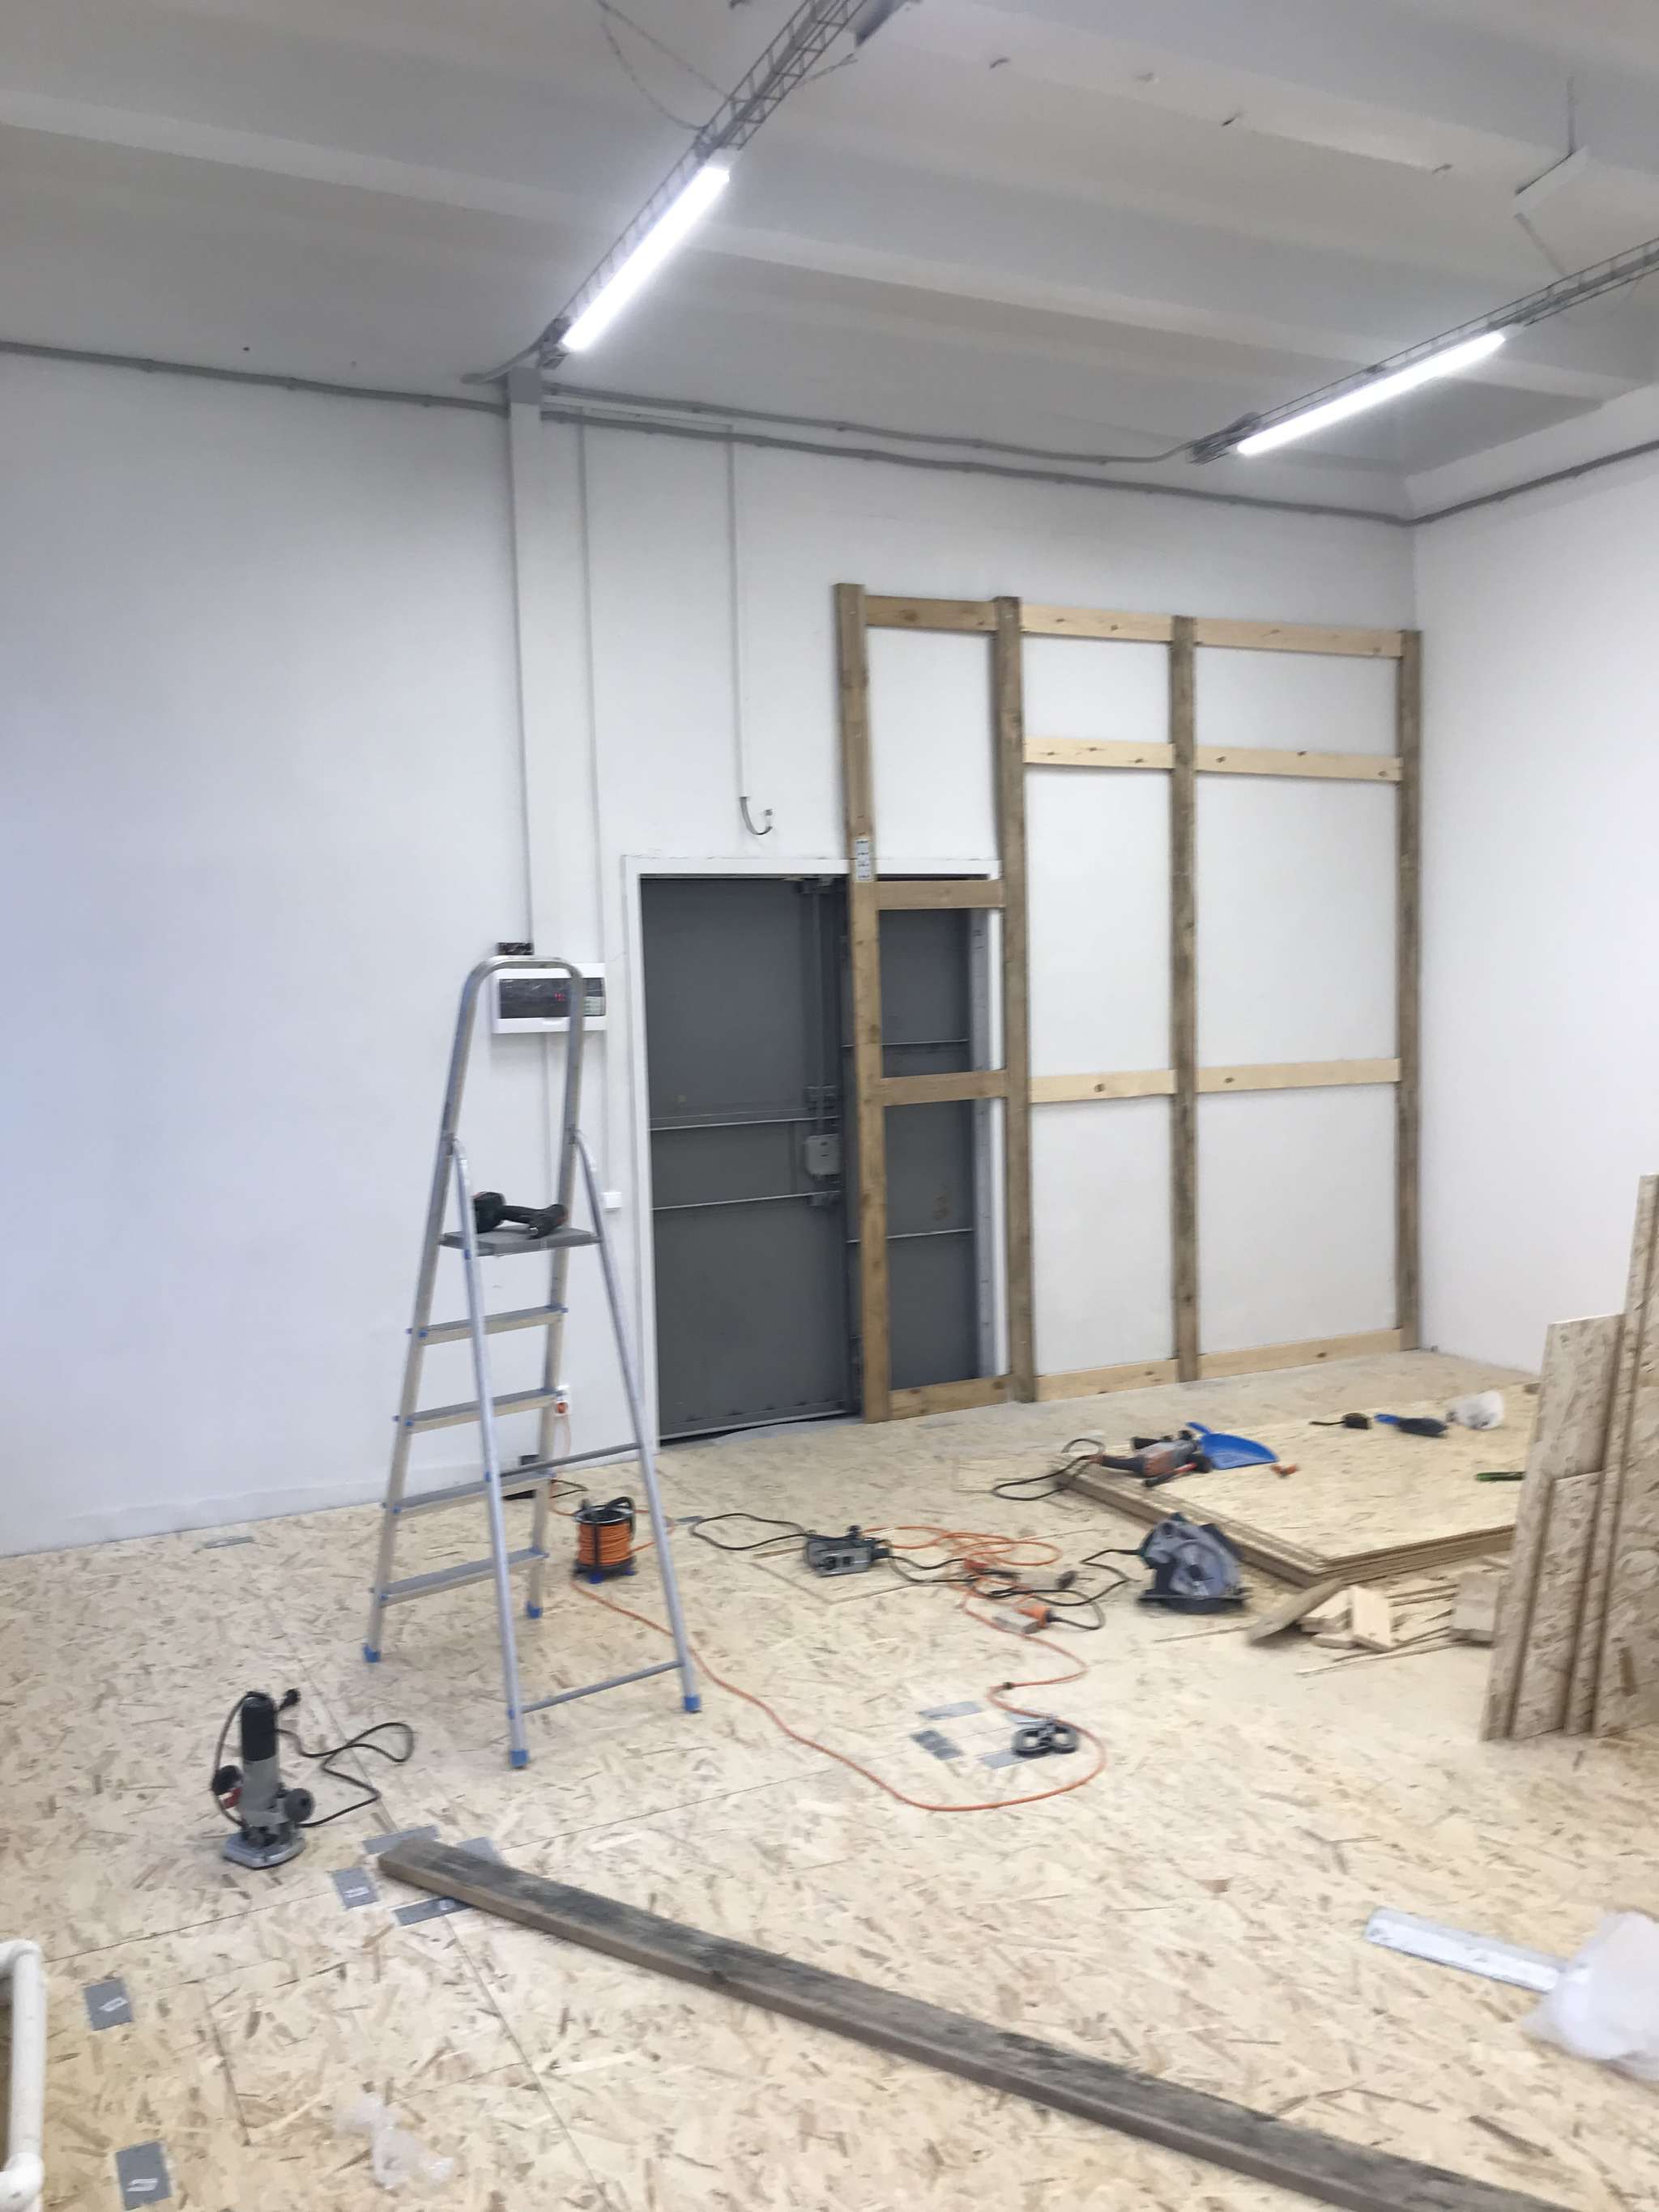 Hello World - Part 7 - Building the Cyclorama - My, Photo studio, Small business, Business, Networking, Photographer, The photo, Starting a business, Voronezh, friendship, Longpost, Construction, Entrepreneurship, Nikon, Network, Beginning photographer, PHOTOSESSION